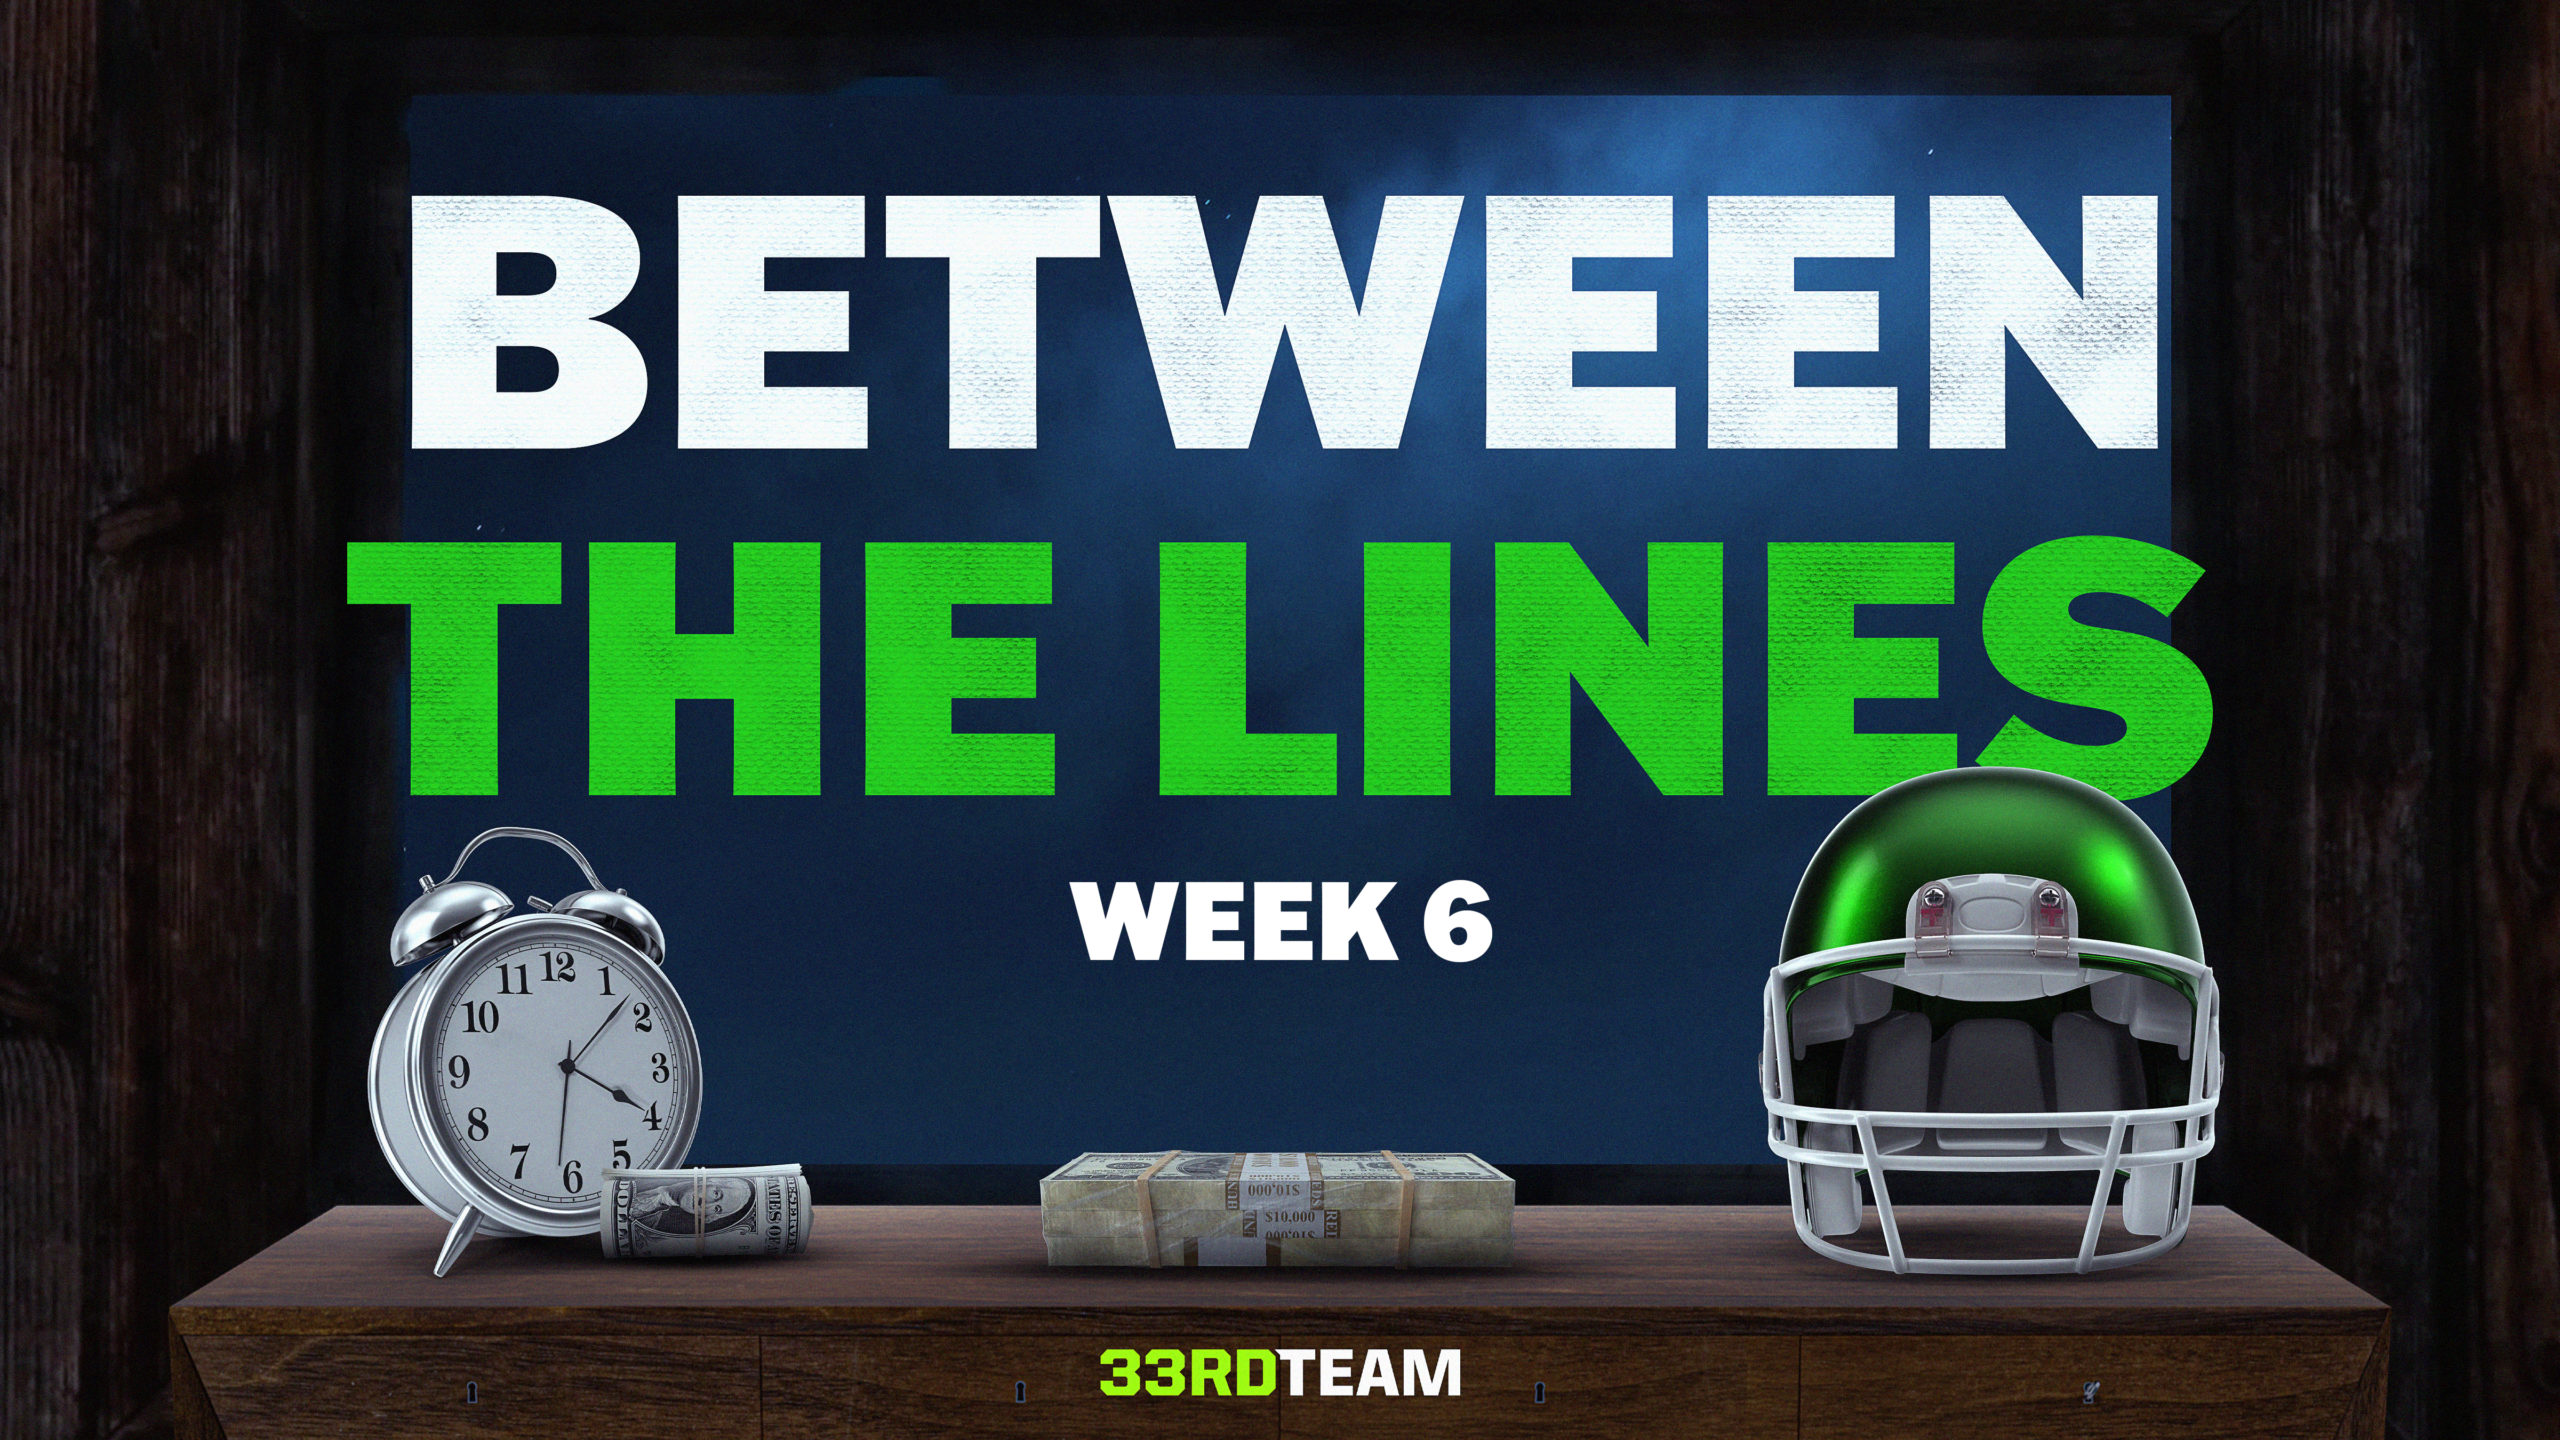 Nfl betting lines week 6 about sports betting